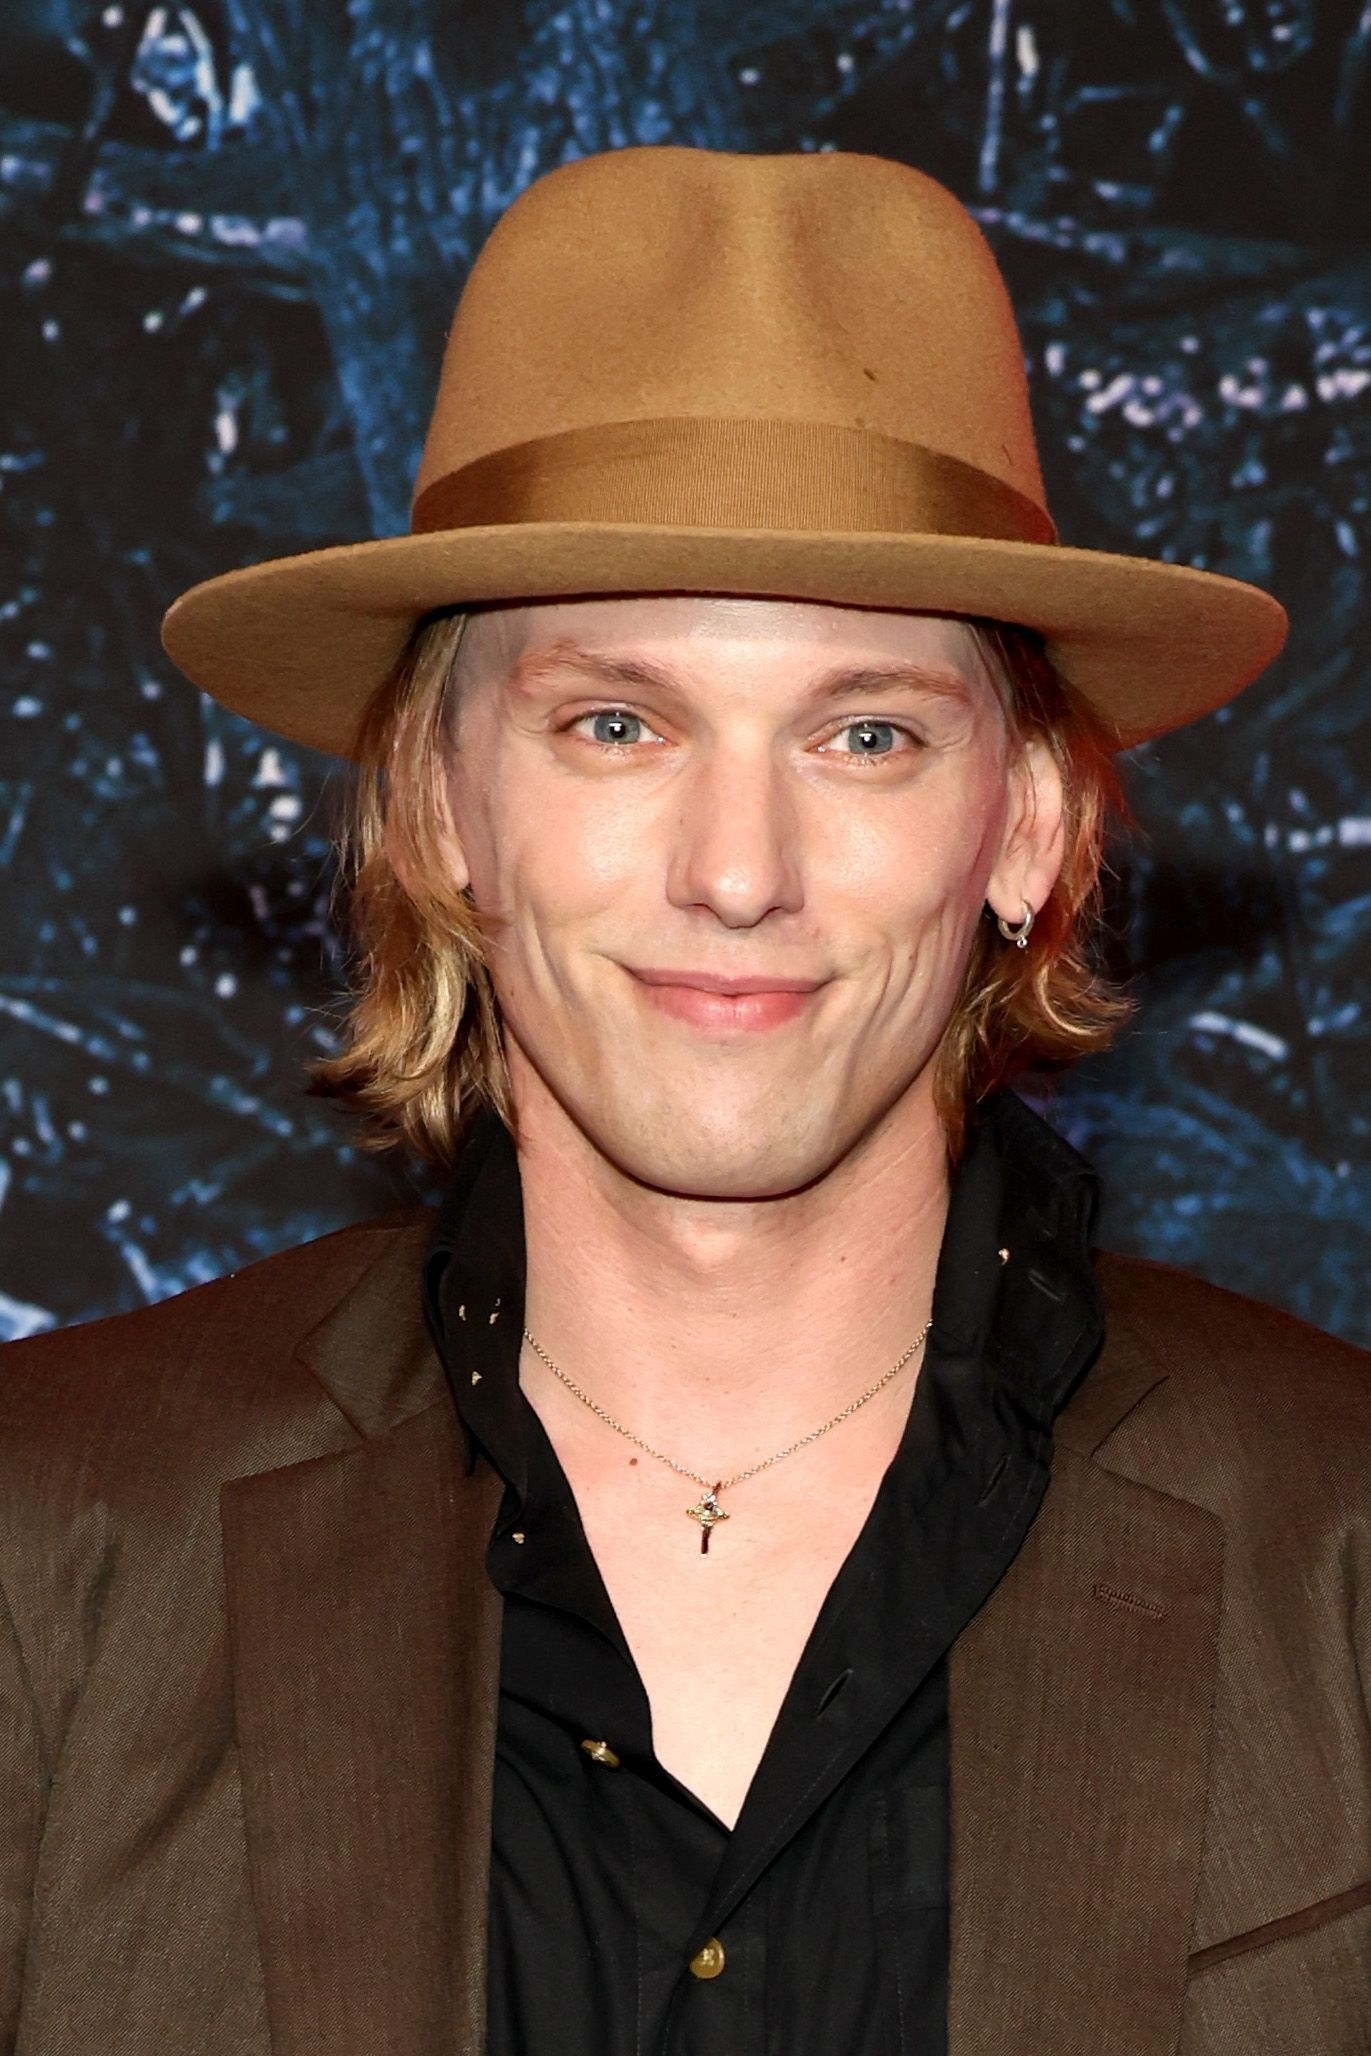 Jamie Campbell Bower on the red carpet